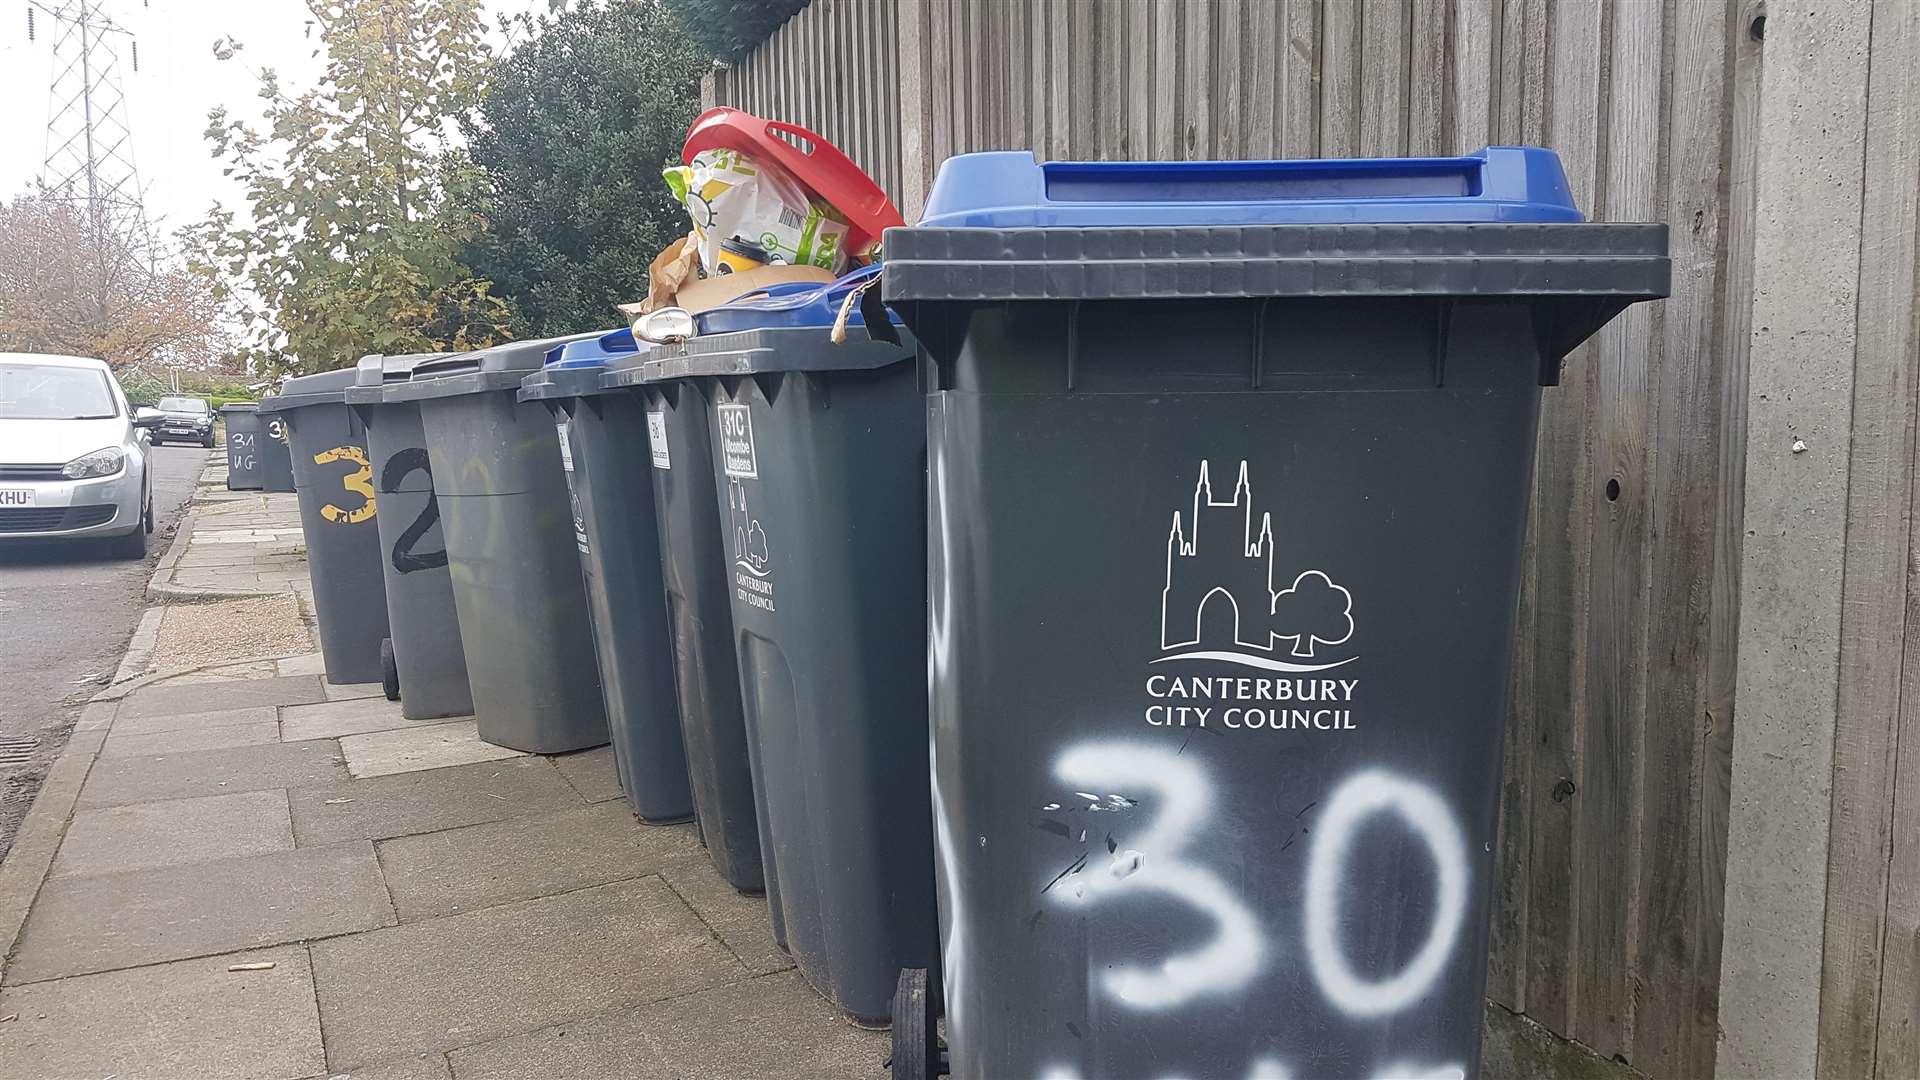 Bin collections are due to carry on as normal